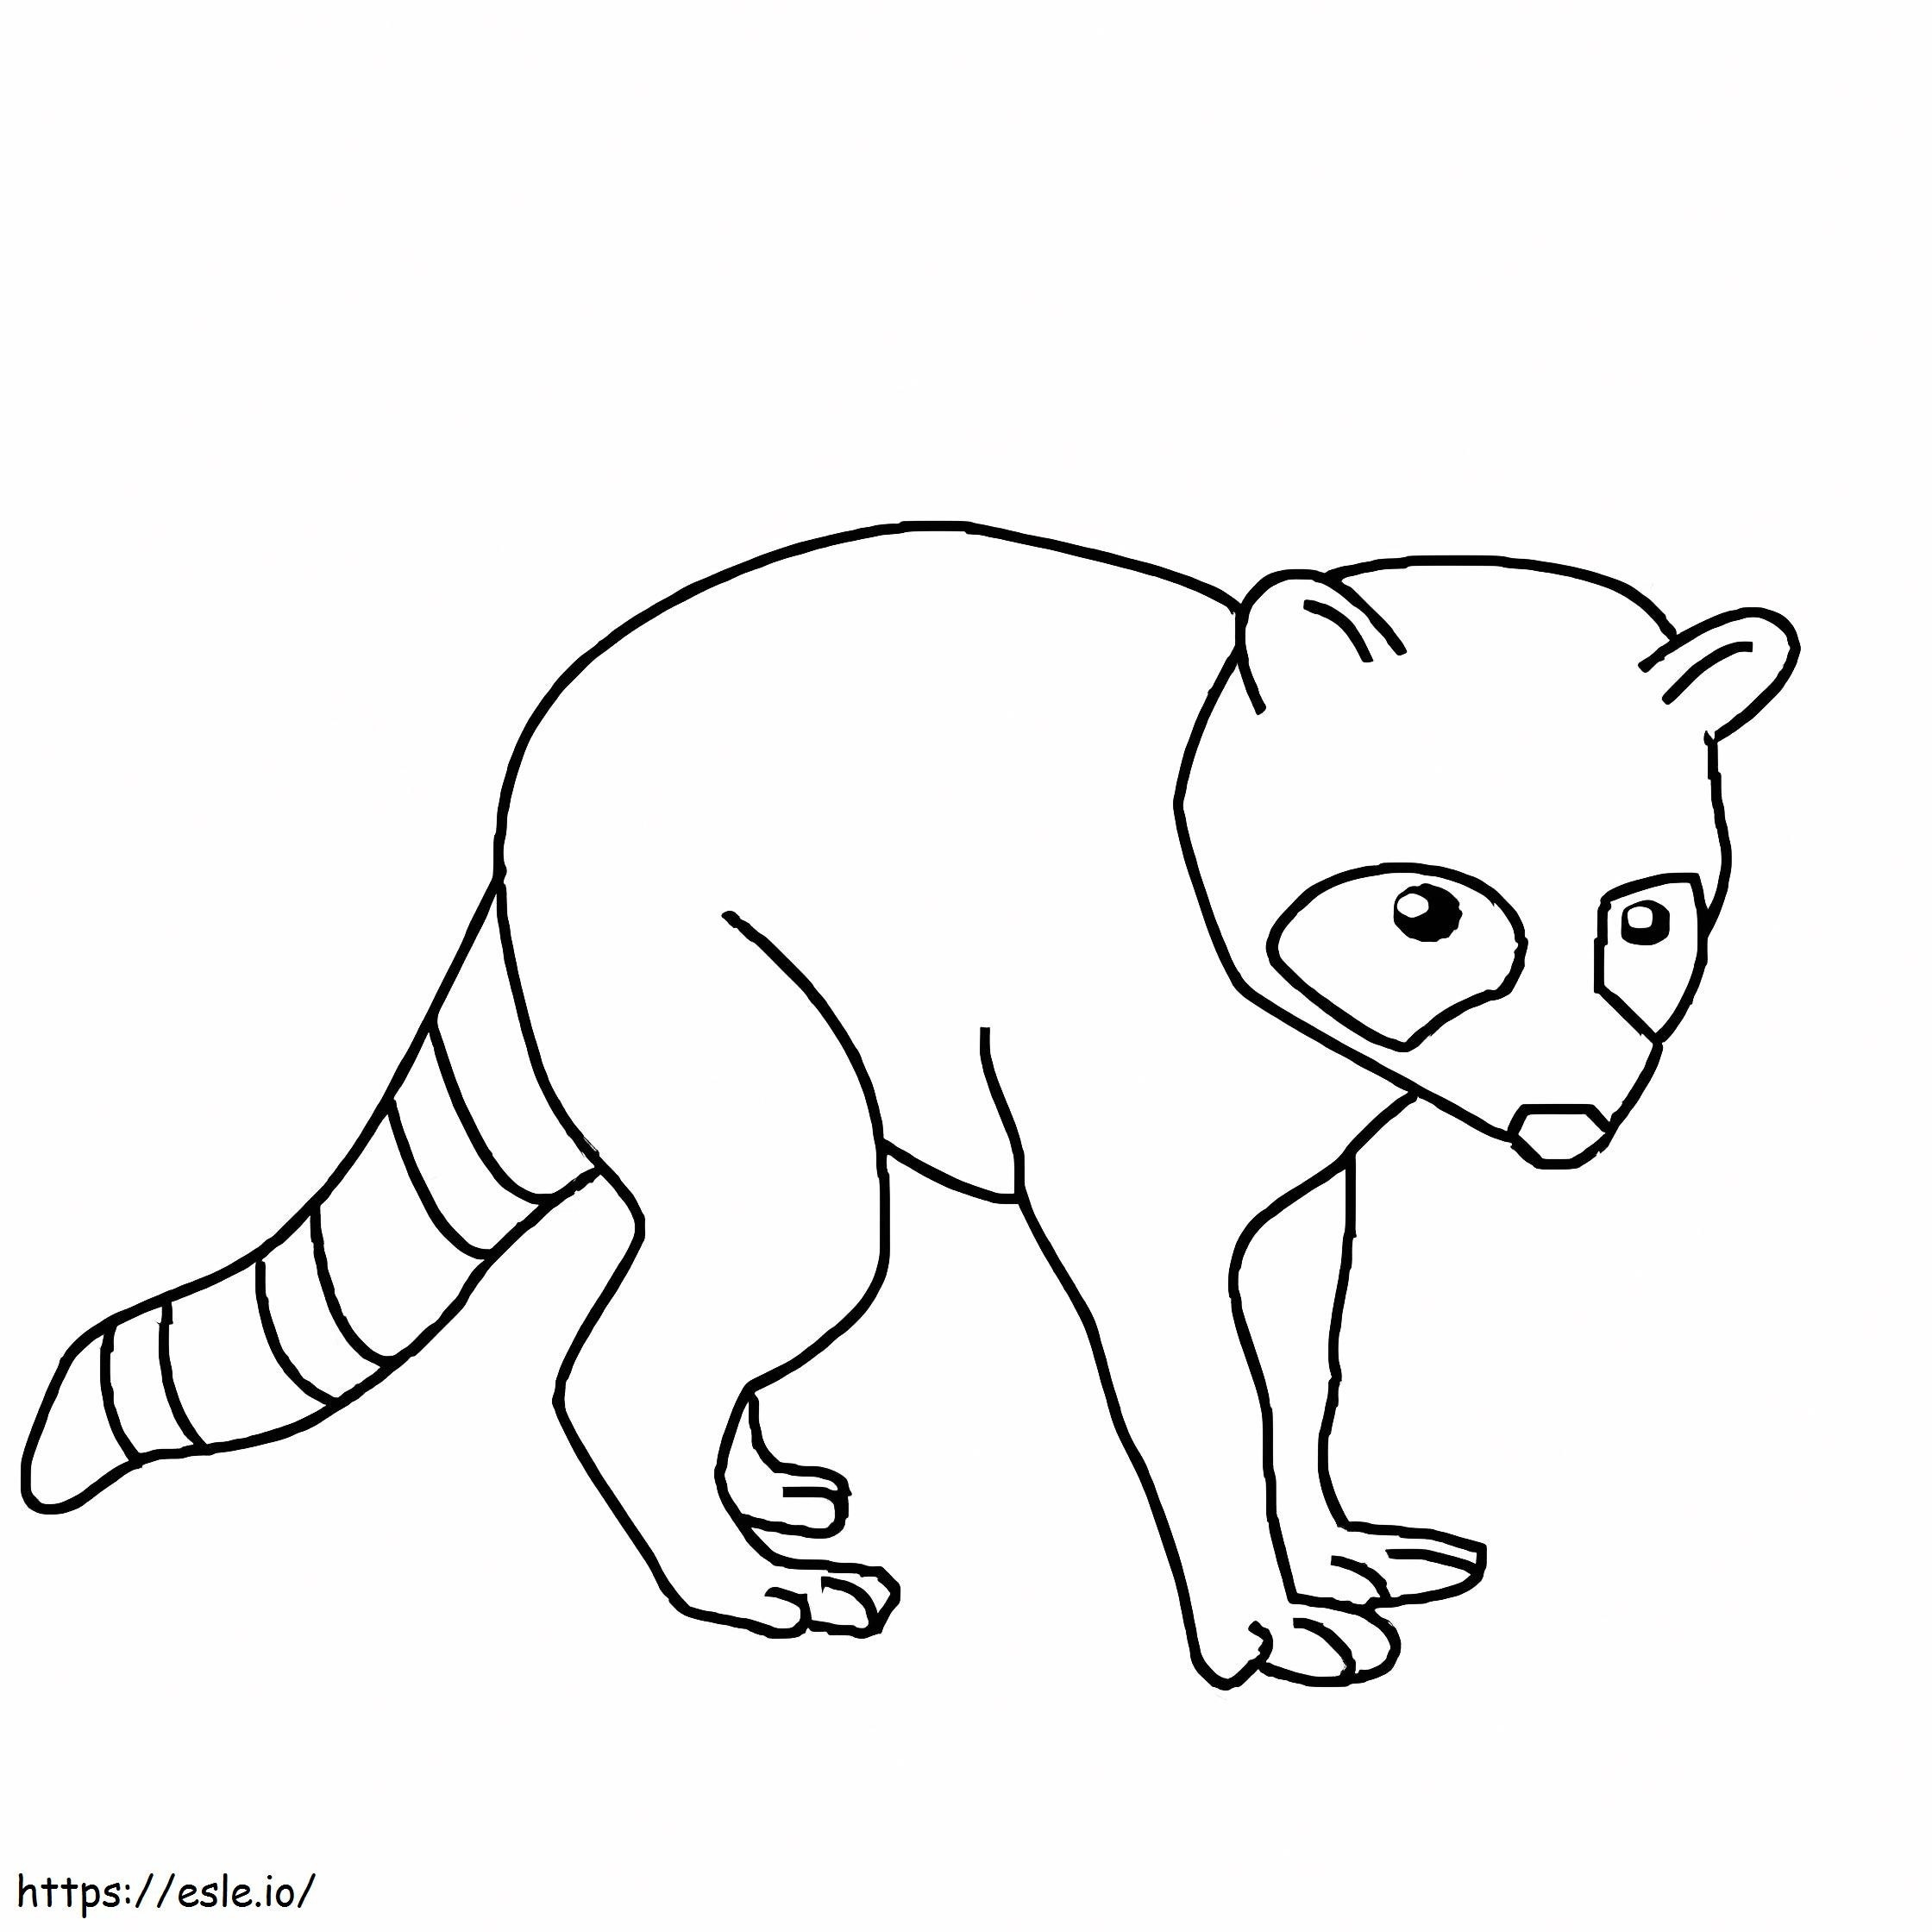 Perfect Raccoon coloring page